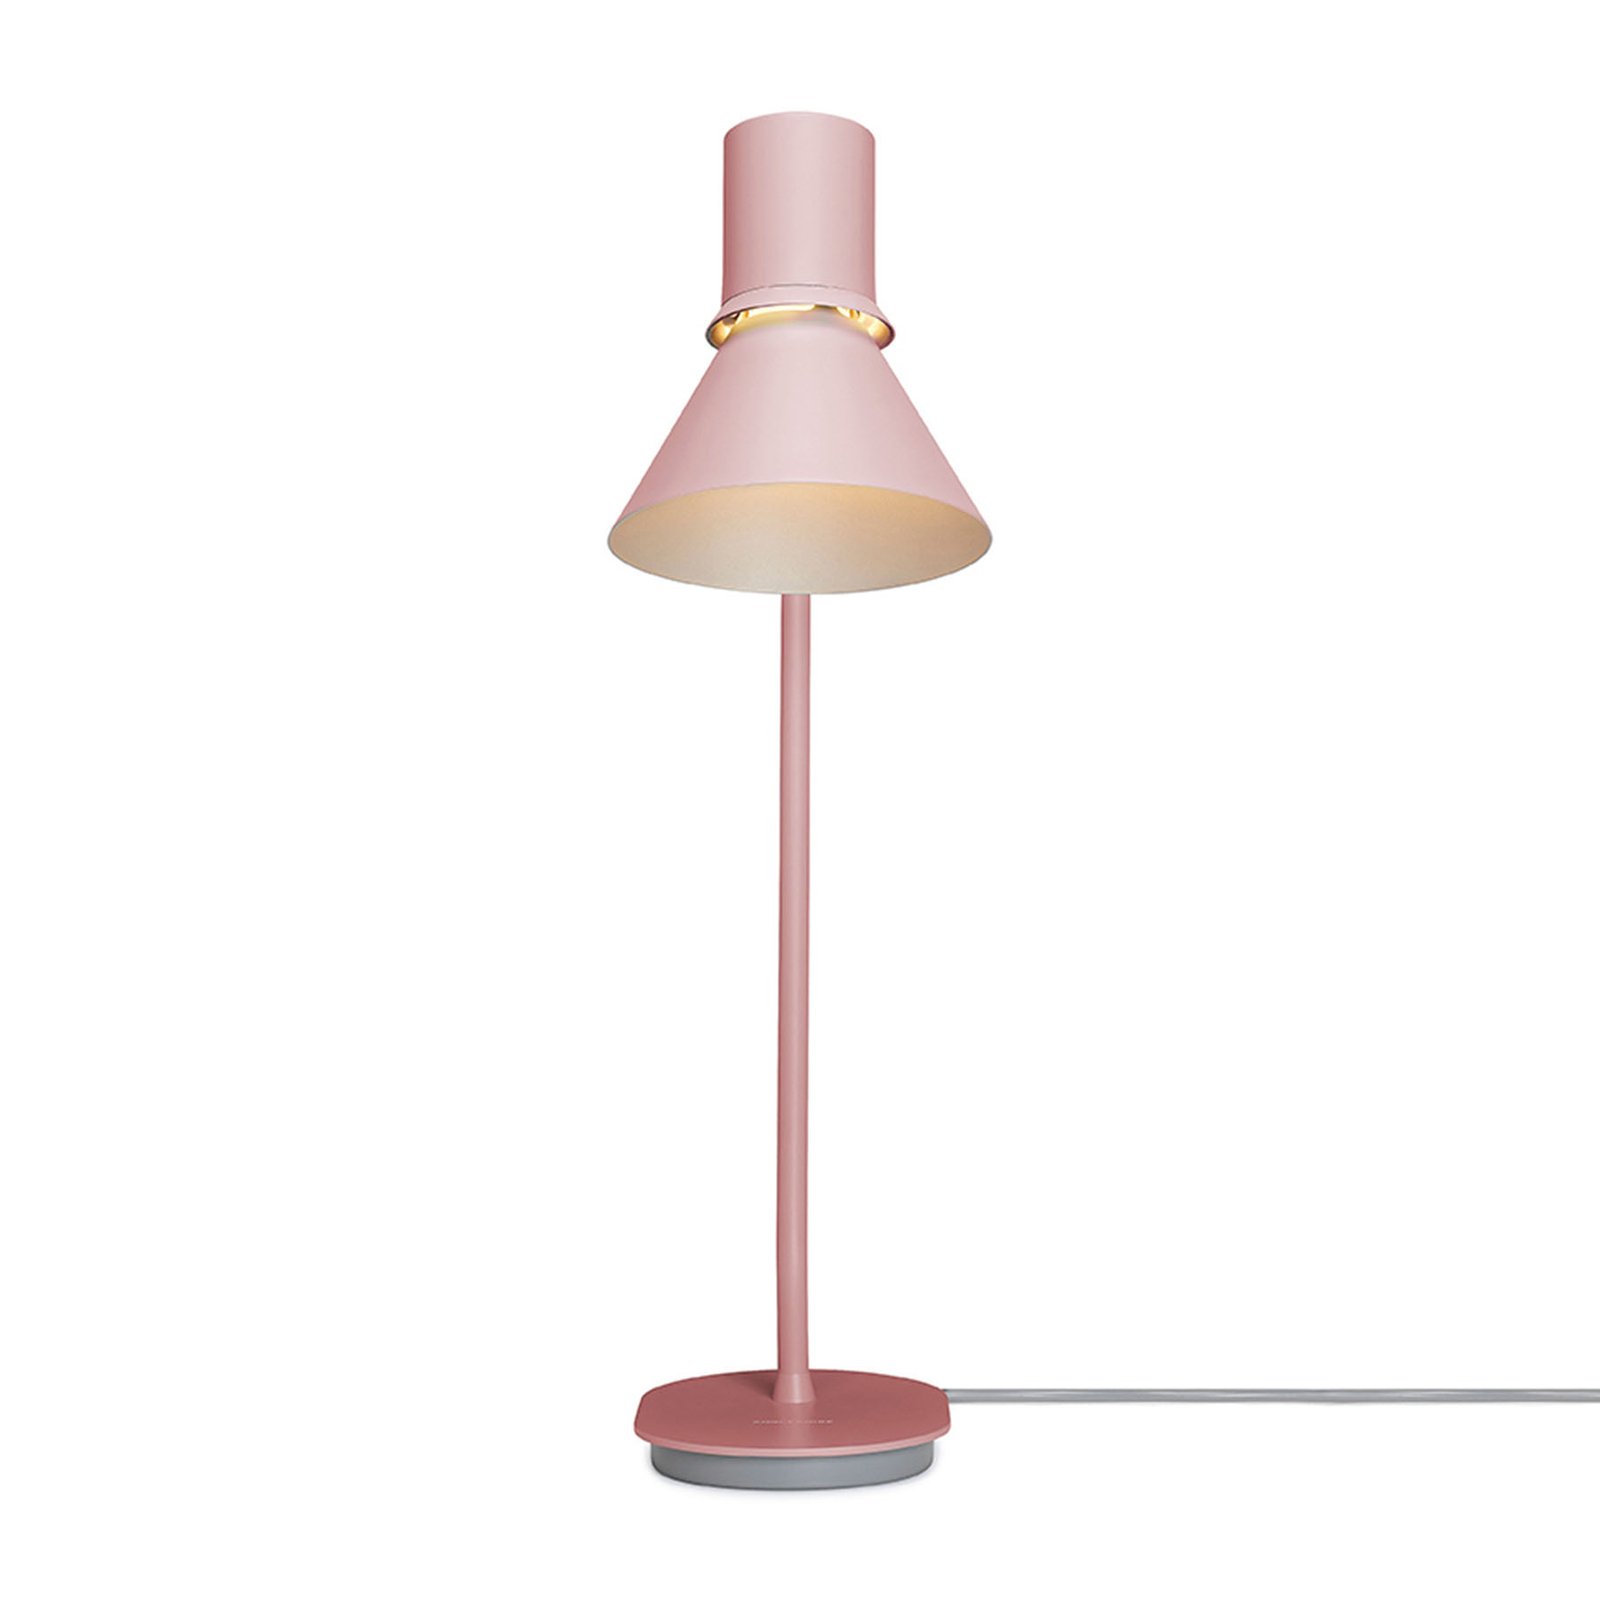 Anglepoise Type 80 Tischlampe, rosé